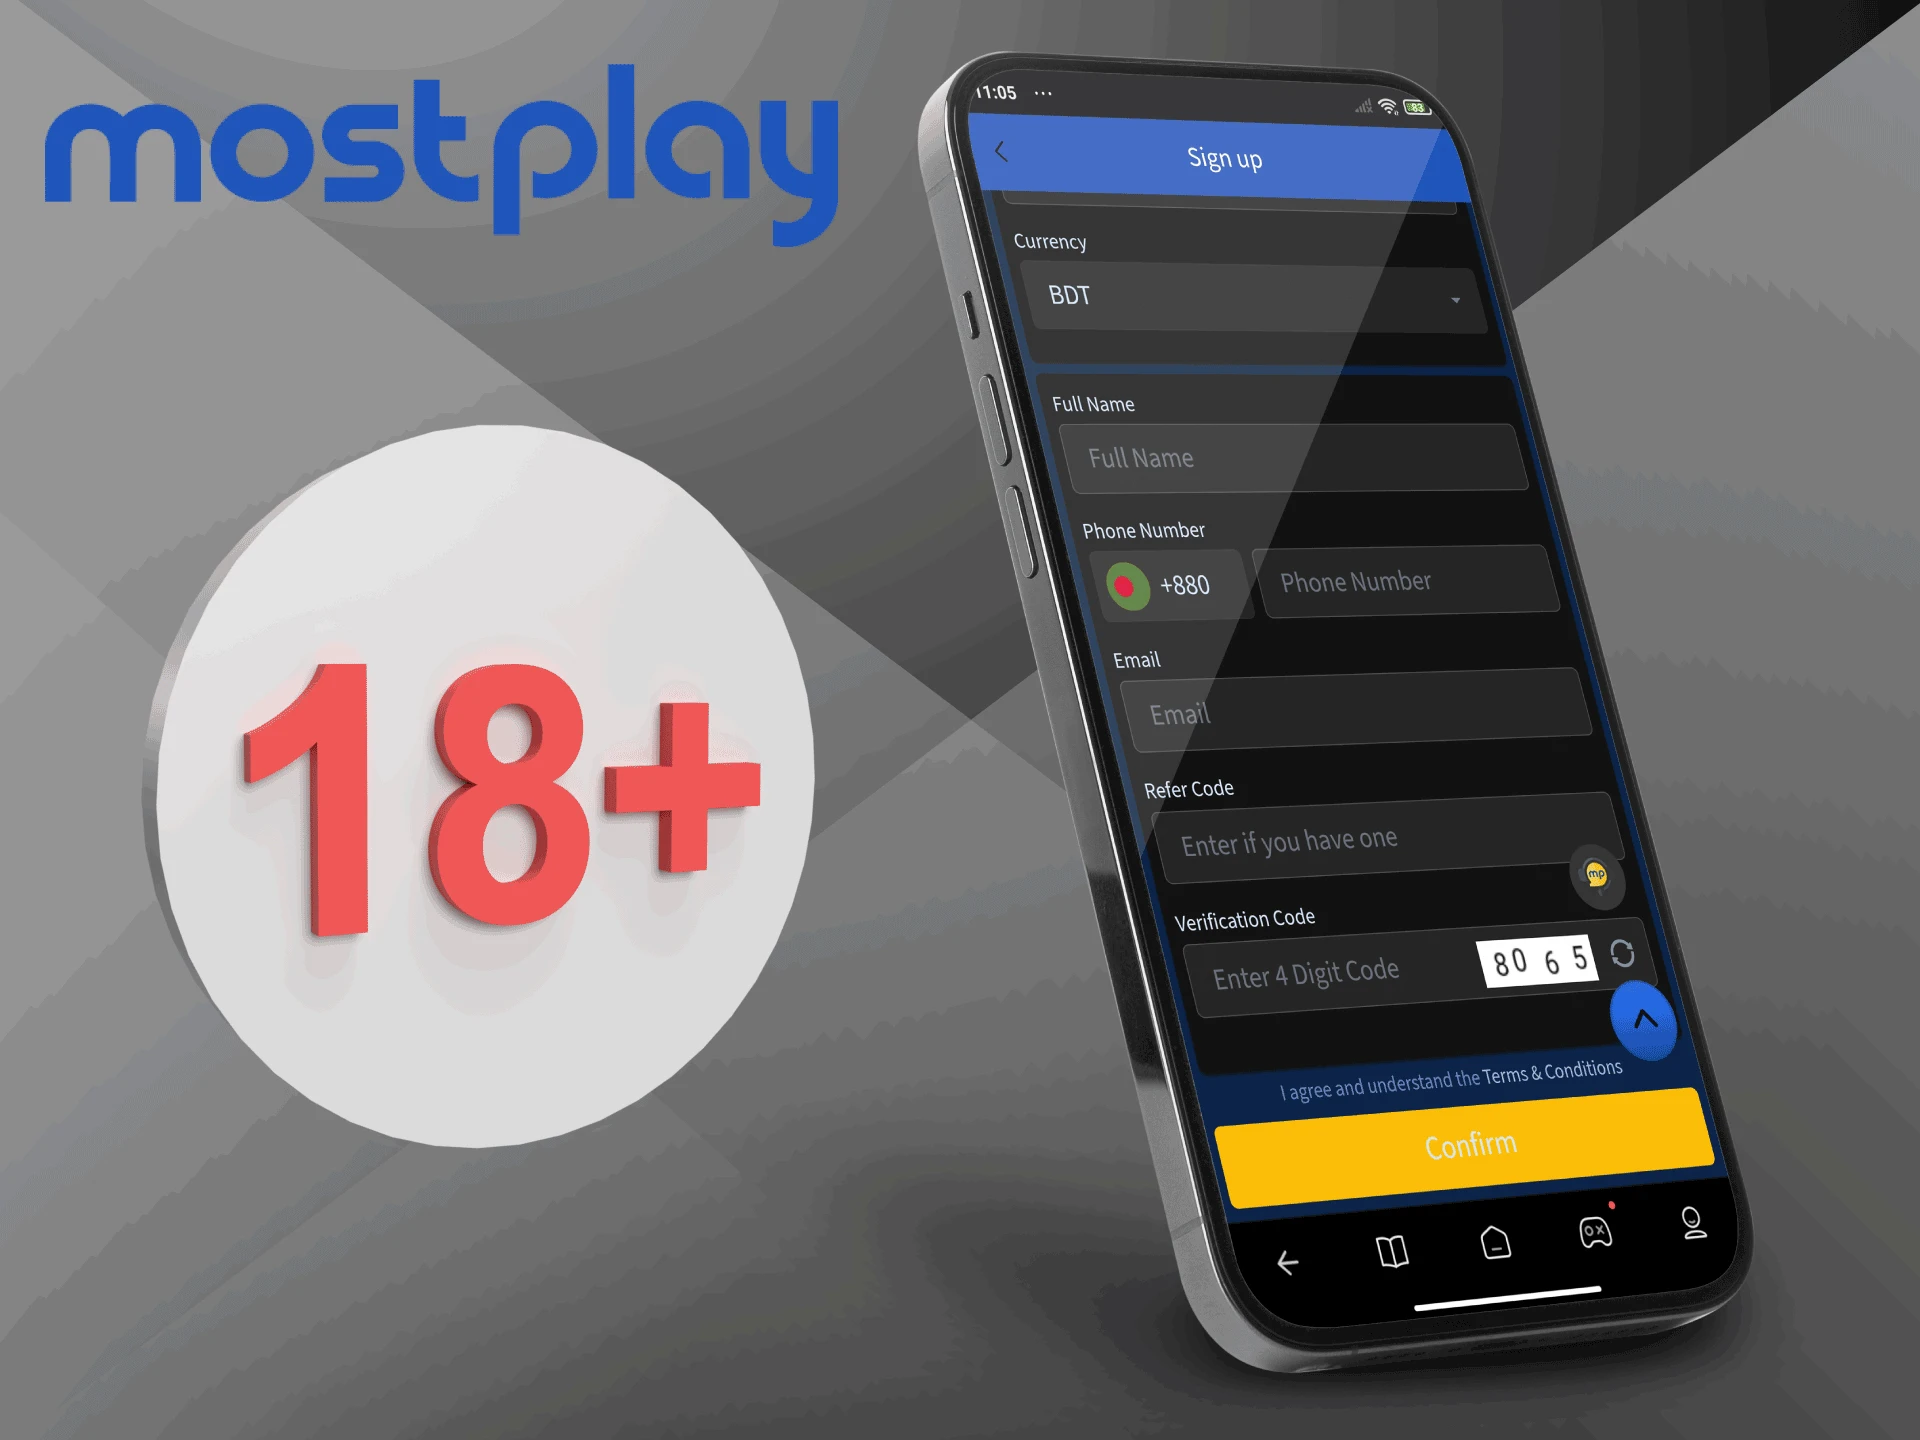 Find out what requirements you need to meet when creating an Mostplay account.